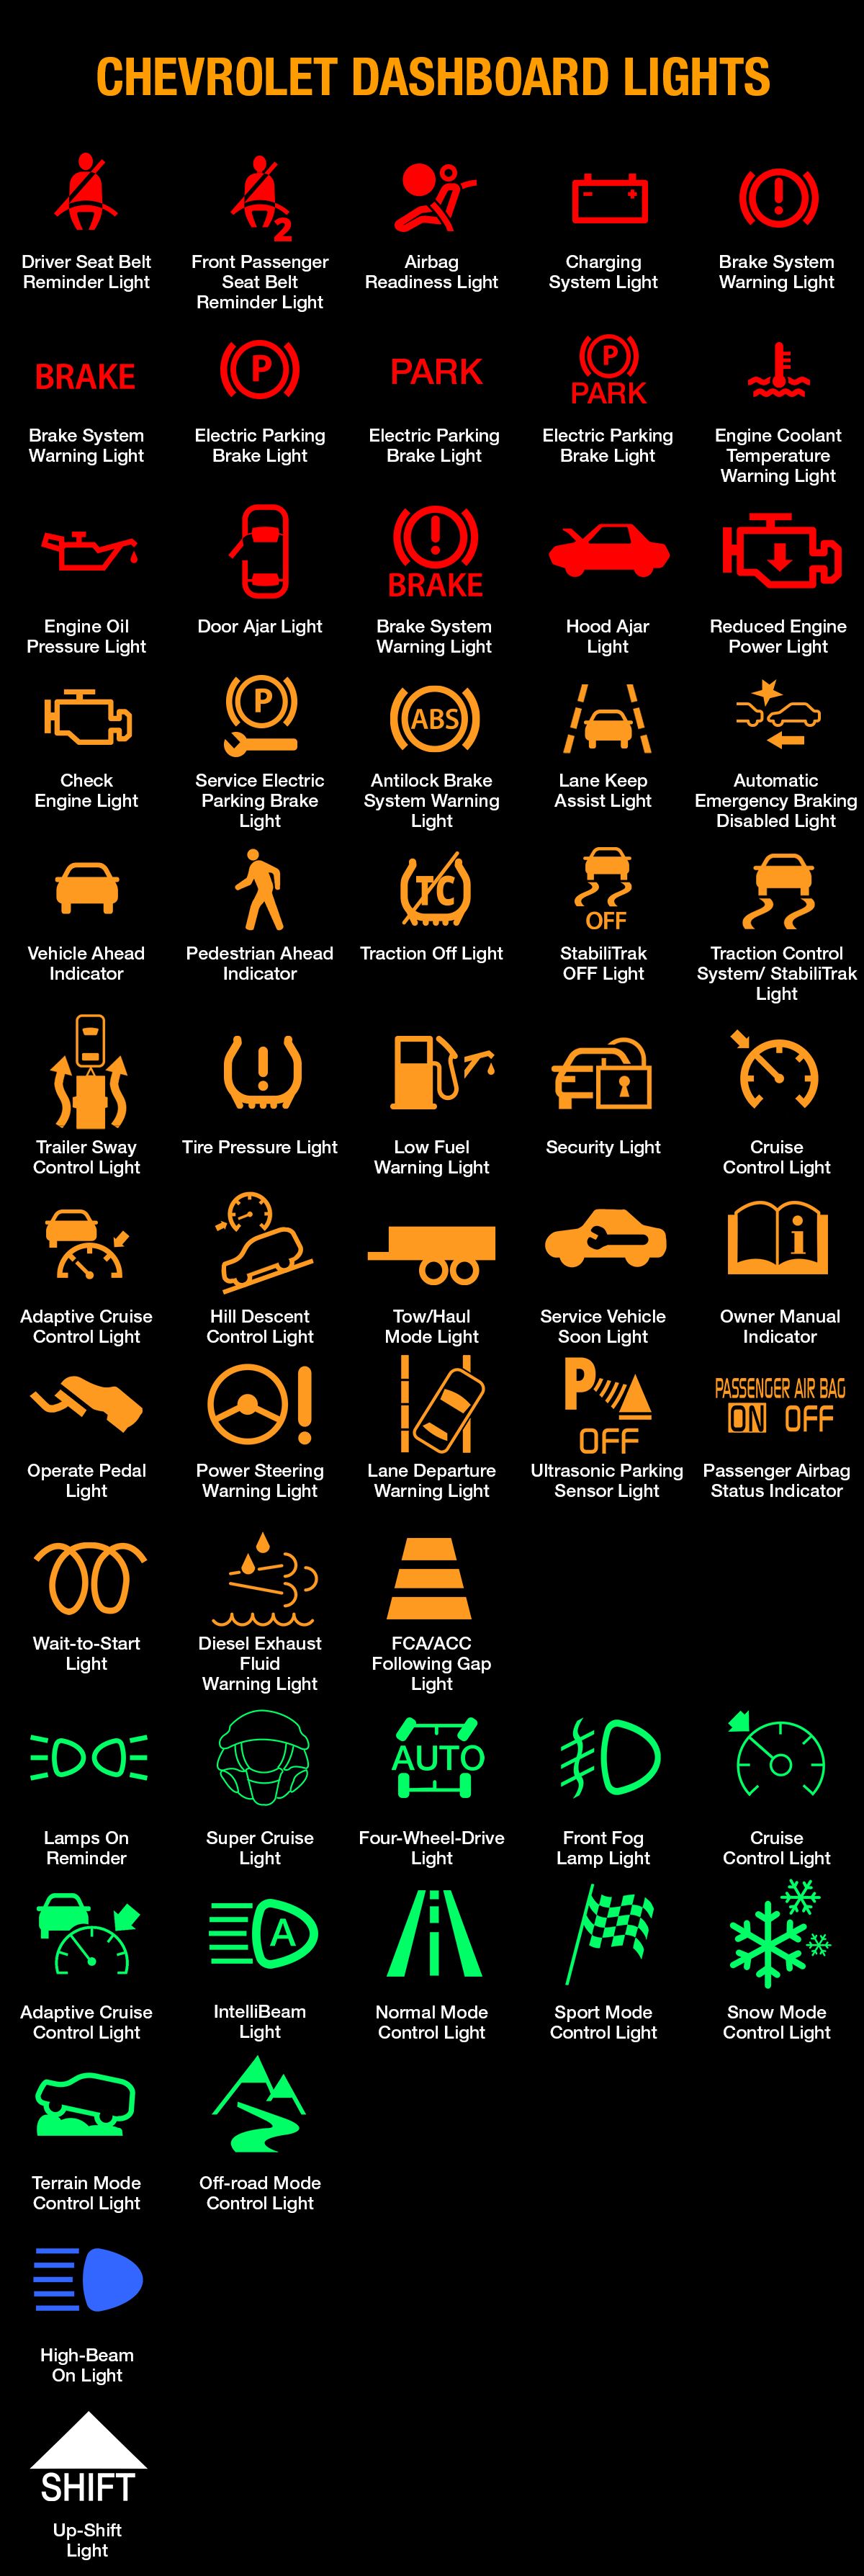 Chevrolet Dashboard Warning Light Symbols Meanings Explained Andean ...